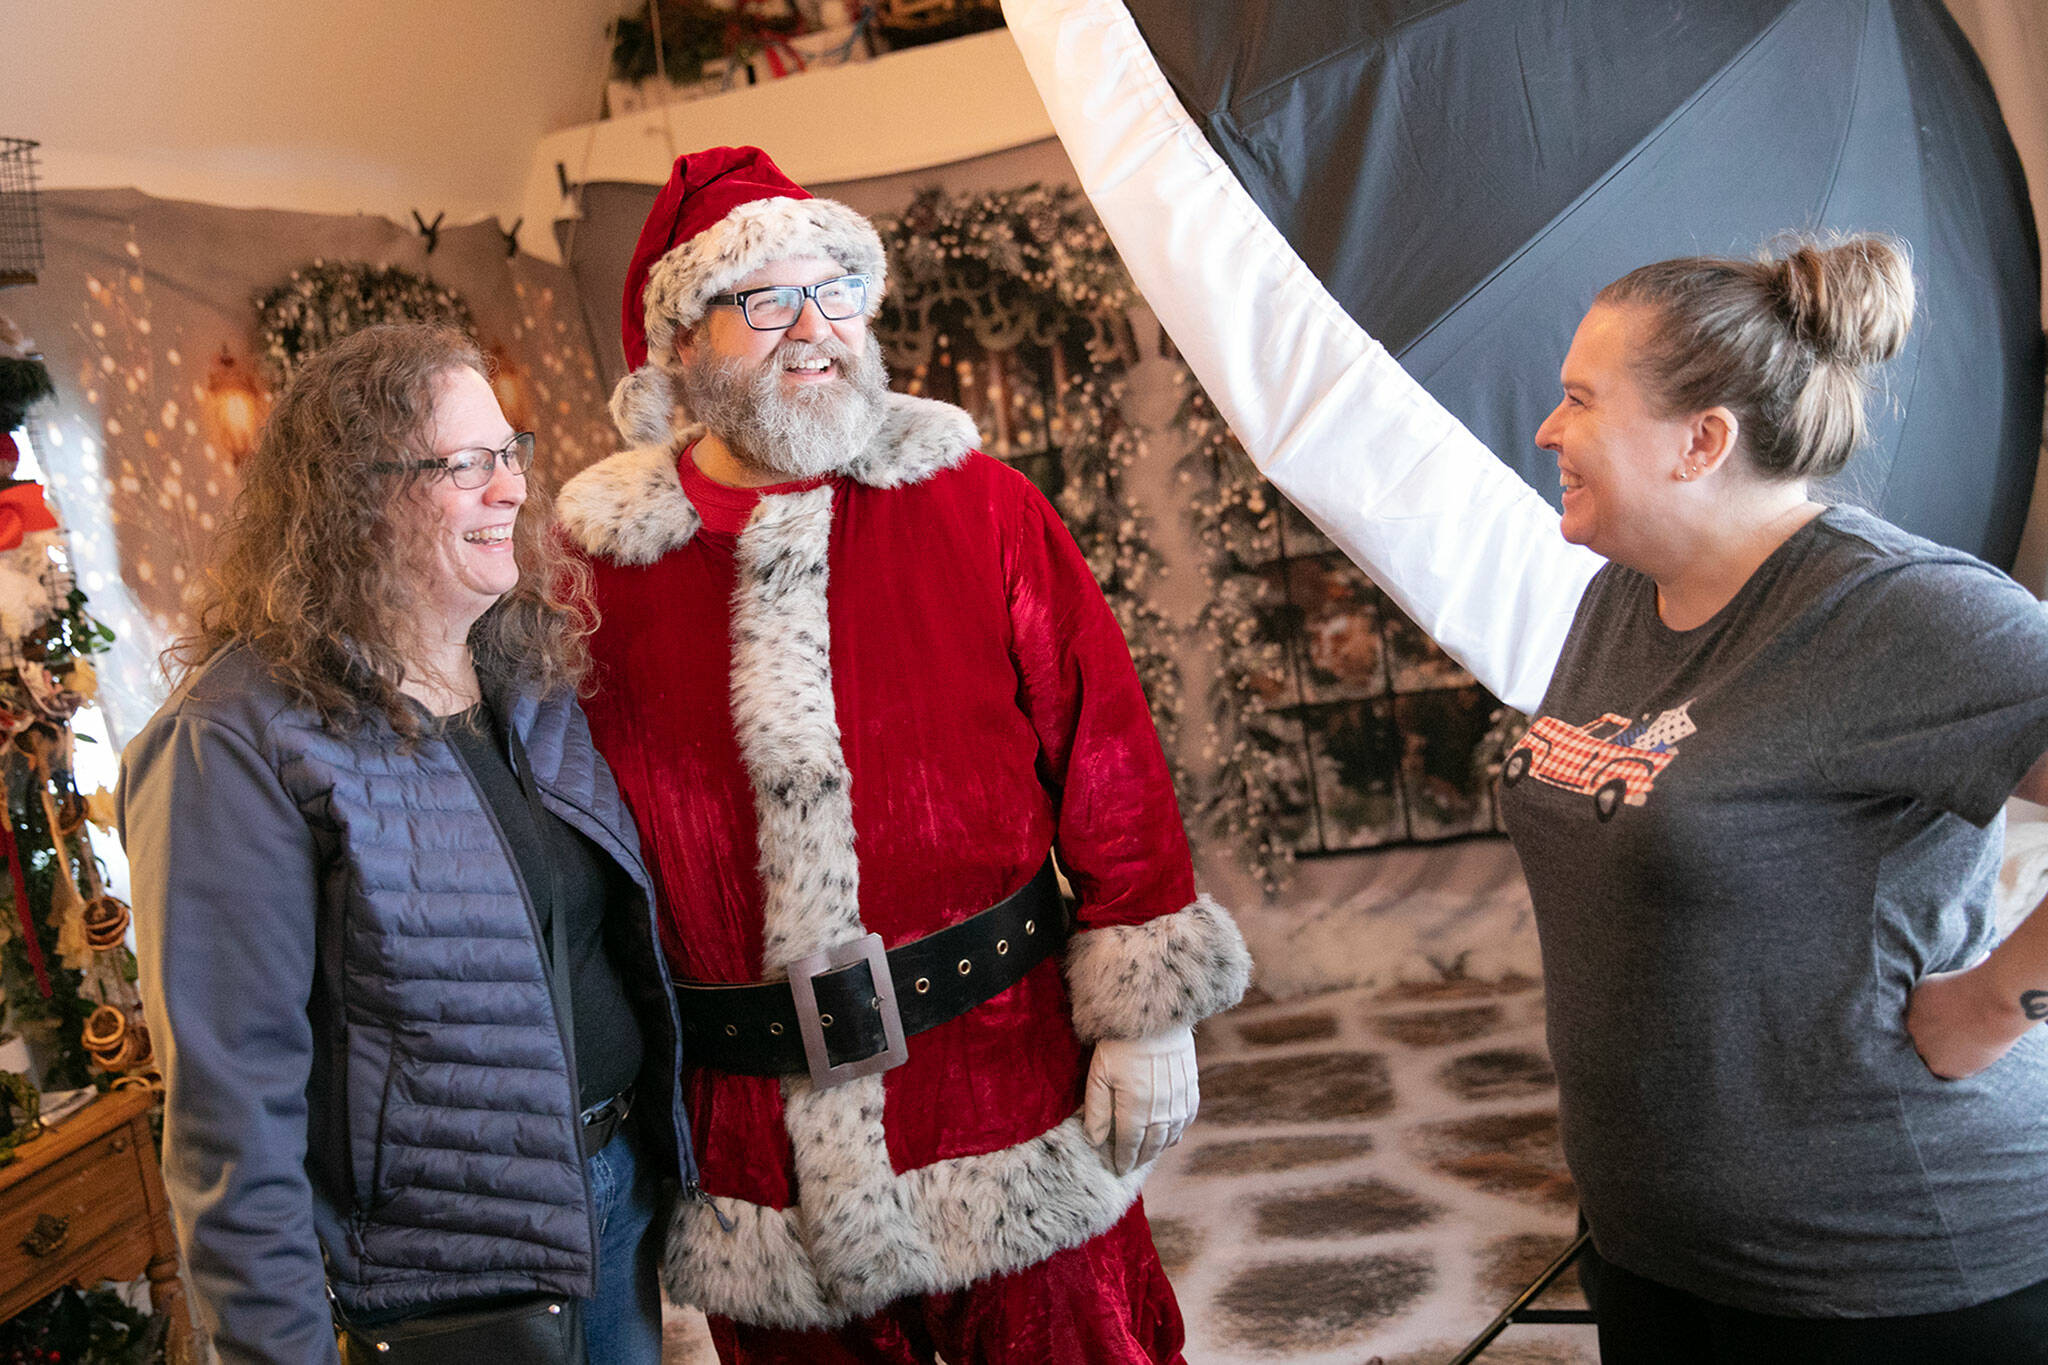 Santa Brett Nichols chats with Kristin Johnson, left, and photographer Stacy Yonkaitis, after doing a photo shoot with the Johnson family on Dec. 4, in Monroe. The three go back to their days at Sultan High School roughly 30 years ago, and have been doing yearly Christmas photos together for almost a decade. (Ryan Berry / The Herald)